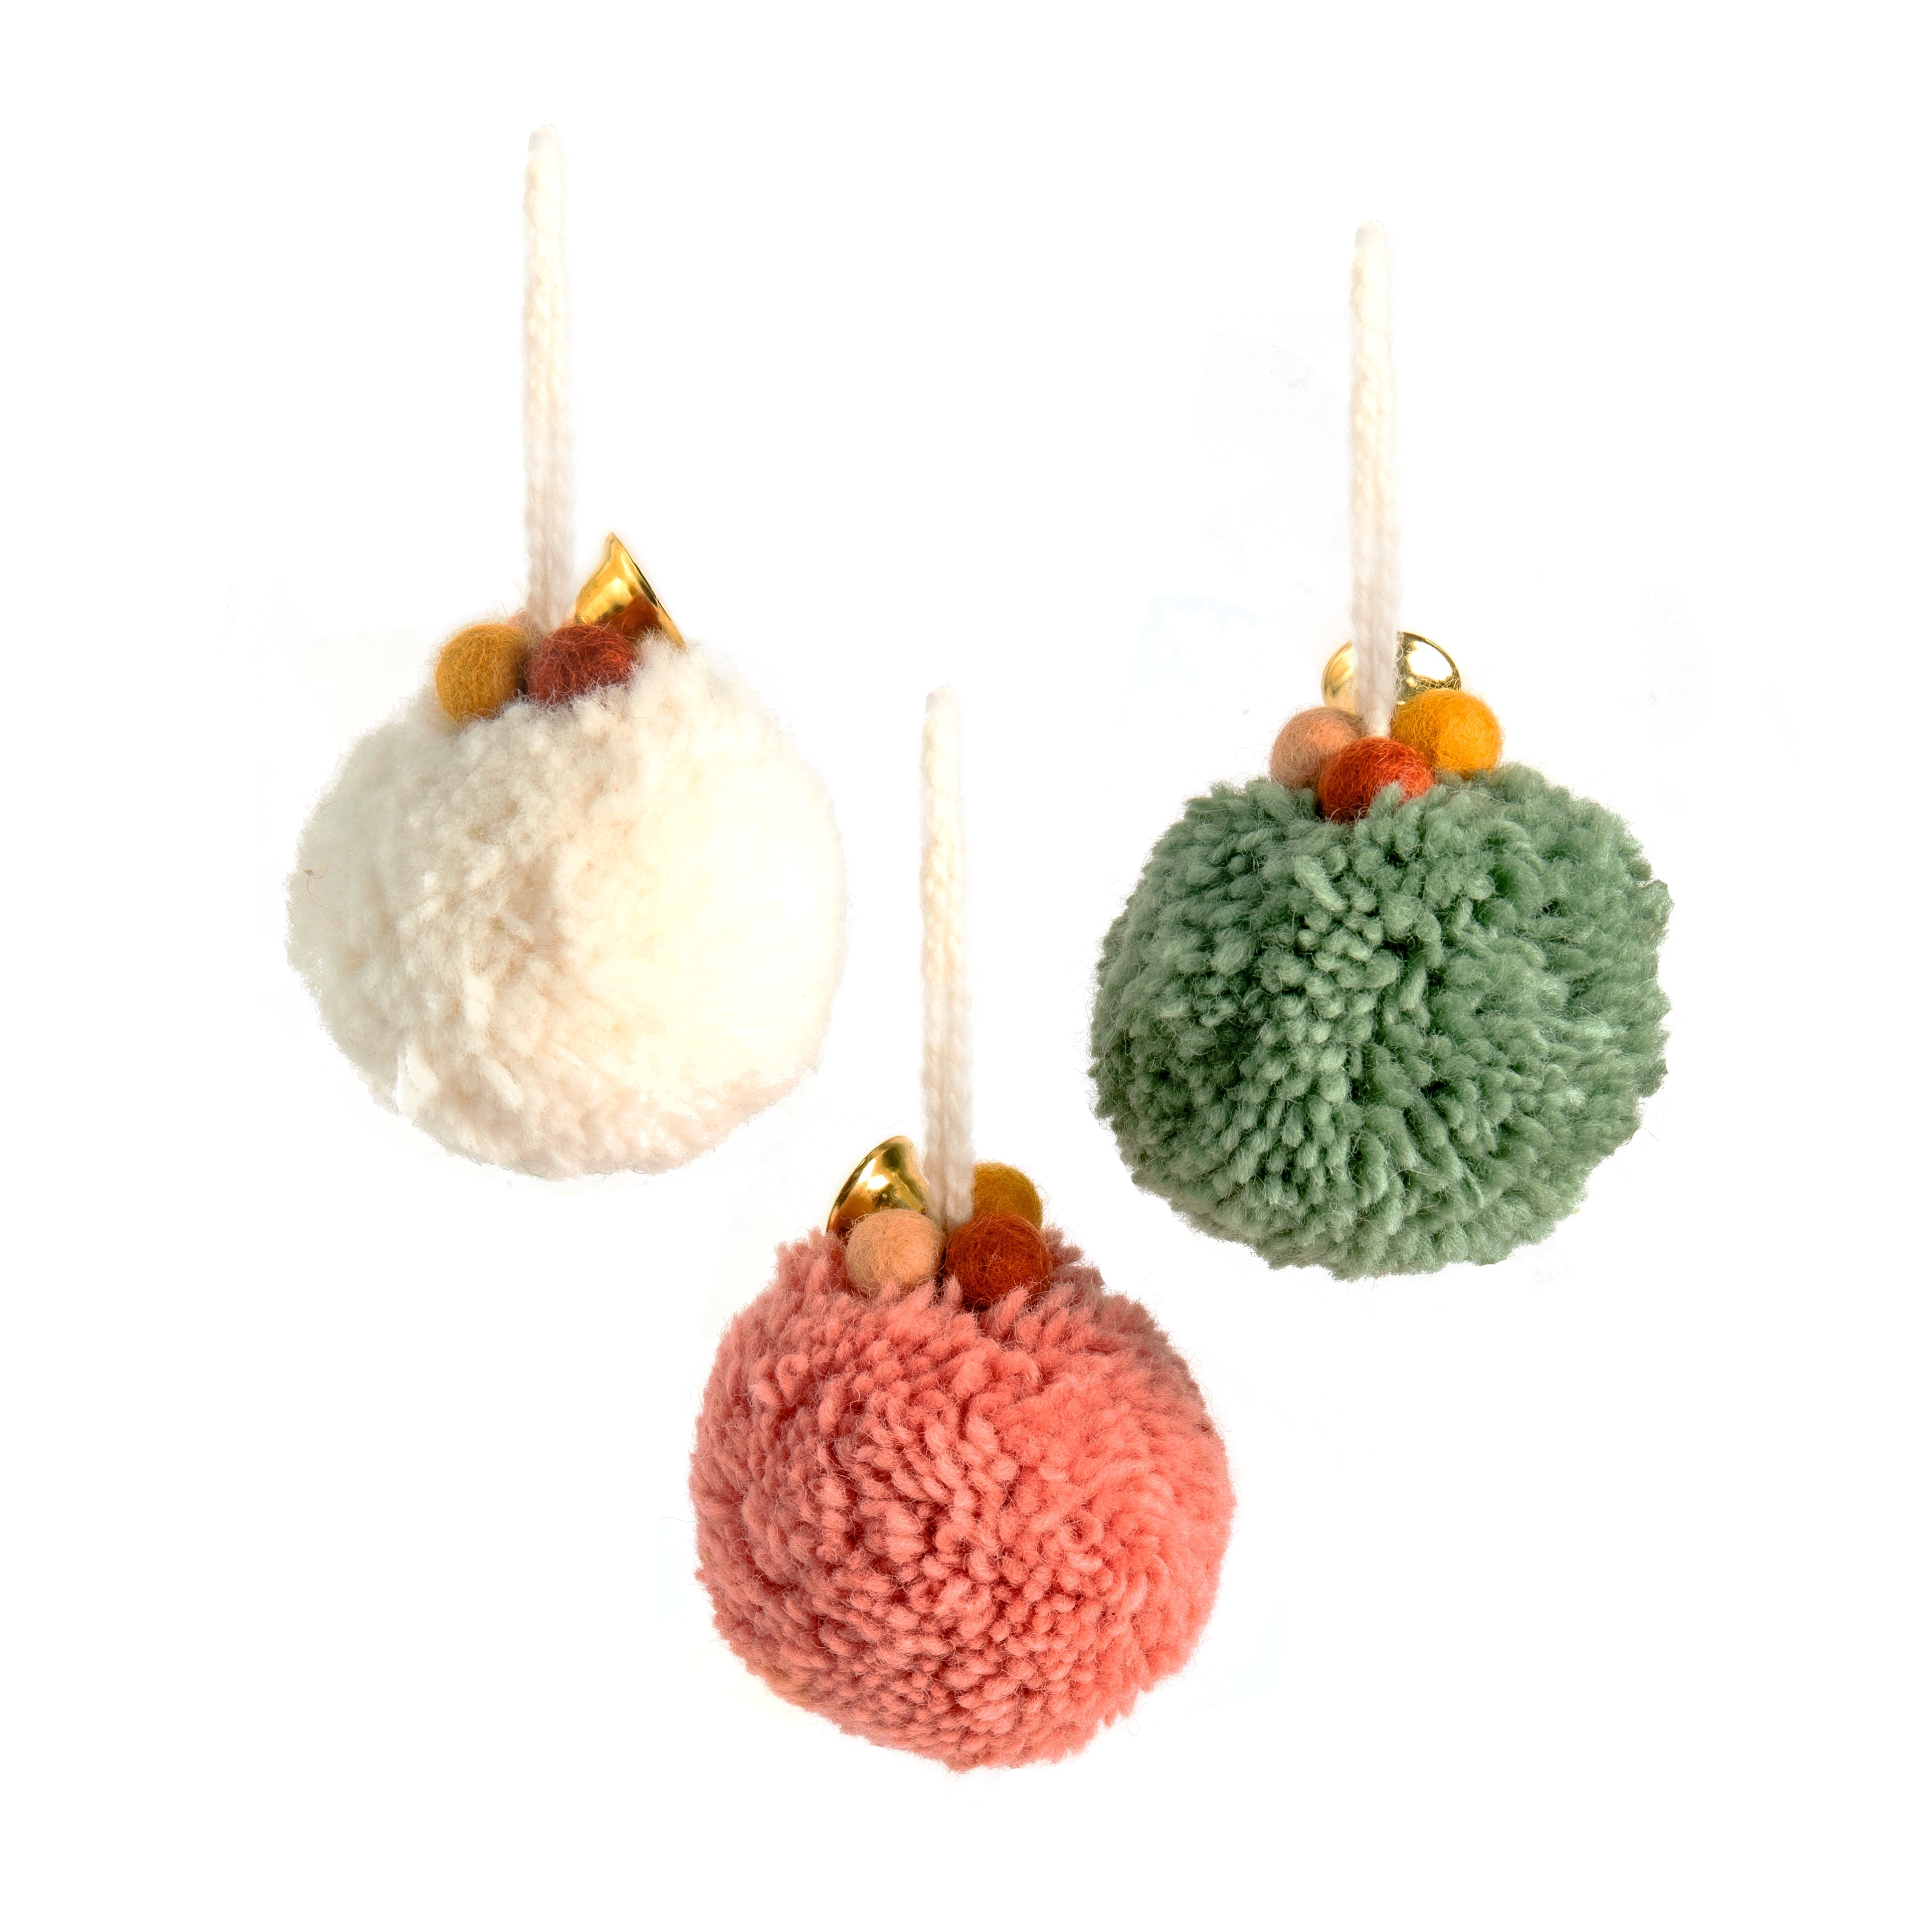 Woolly Baubles (Set of 3) - Christmas Decoration